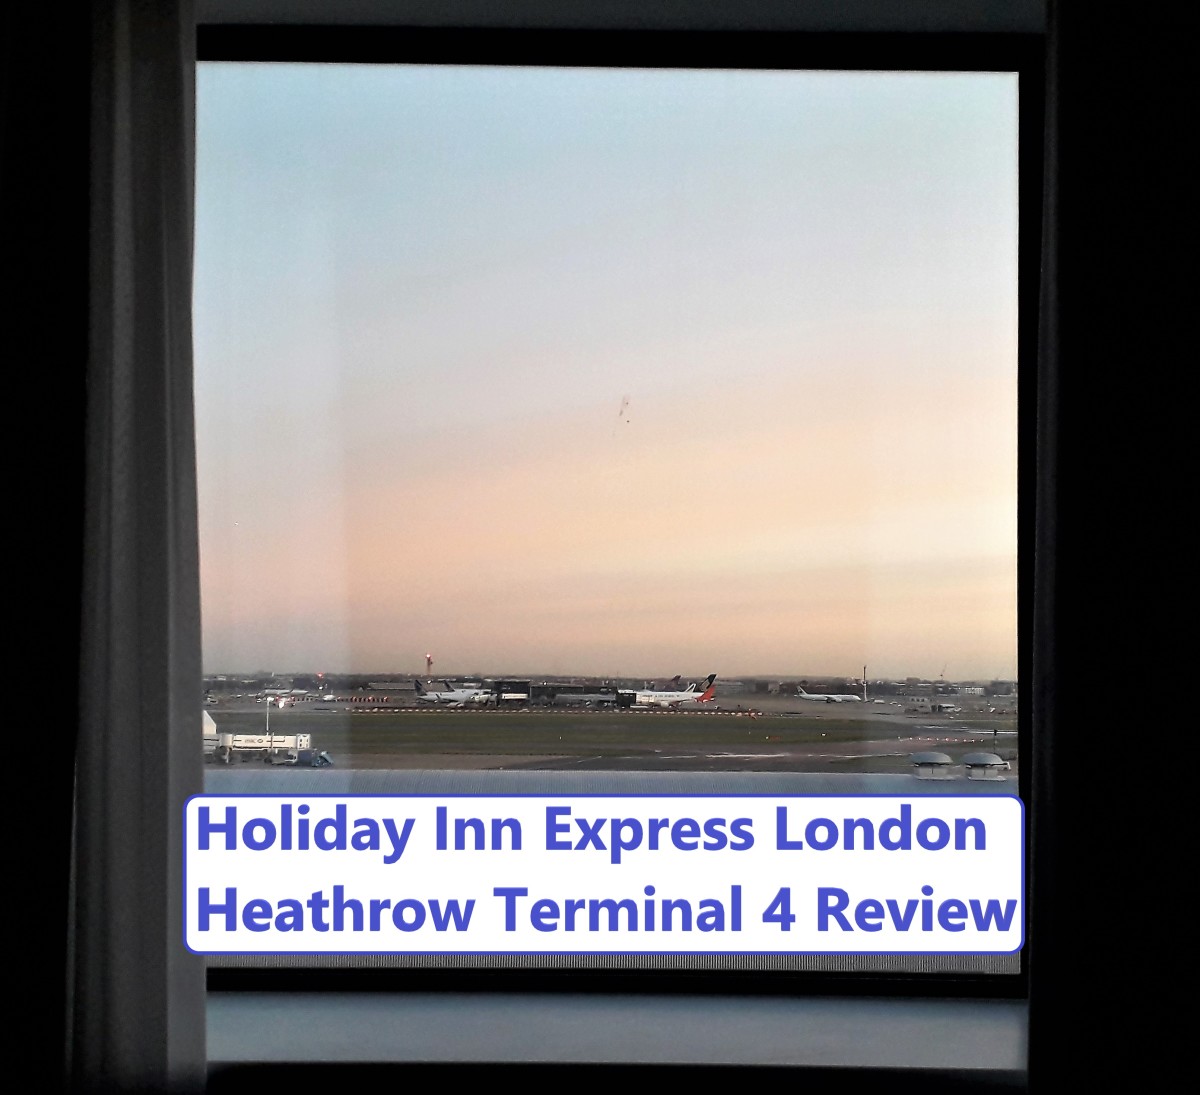 Room with a view at Holiday Inn Express London Heathrow Terminal 4.